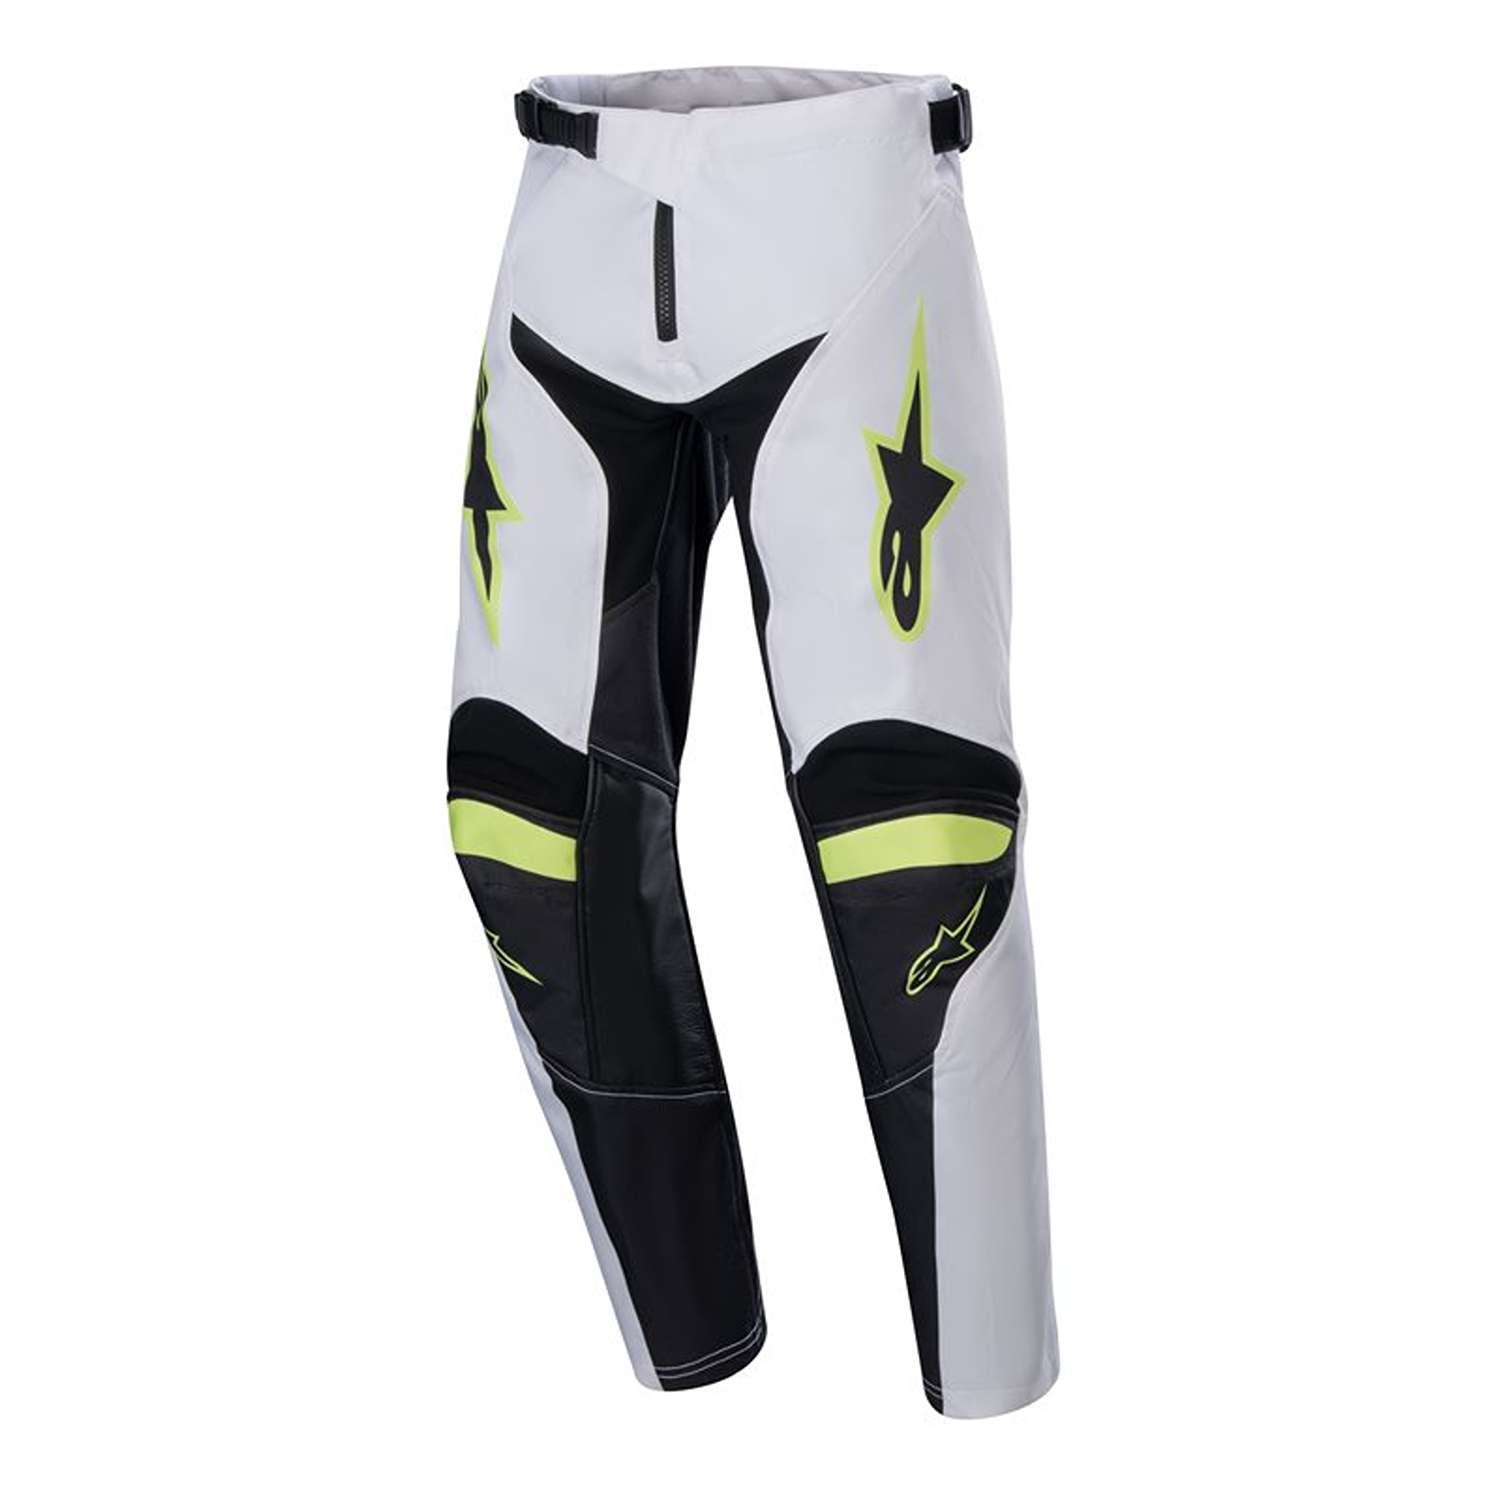 Image of Alpinestars Youth Racer Lucent Pants White Neon Red Yellow Fluo Size 28 EN